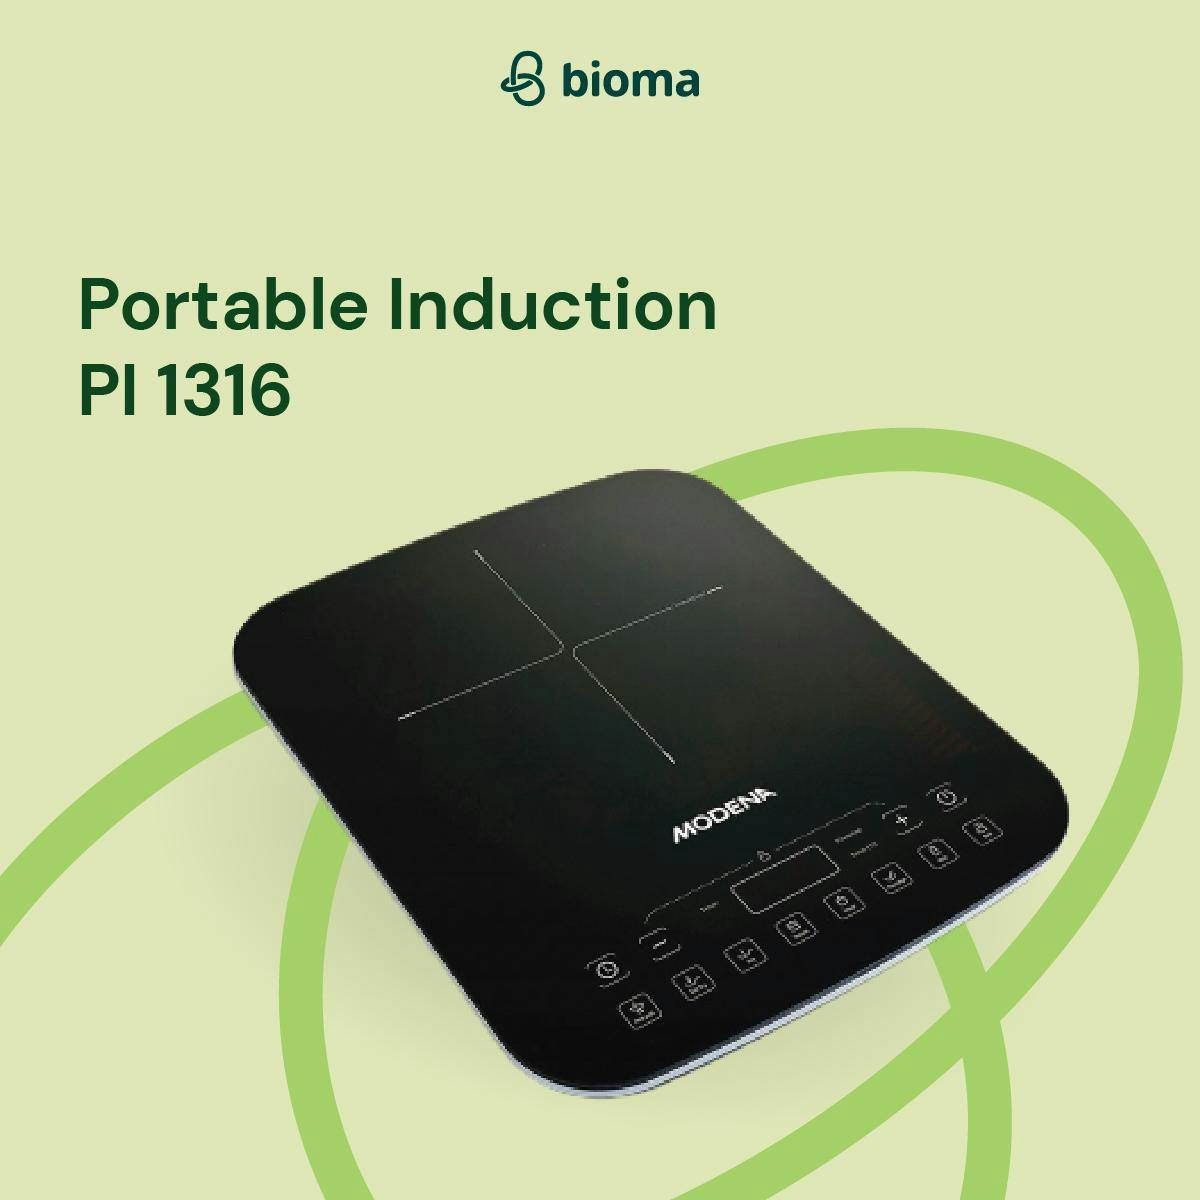 Portable Induction PI 1316